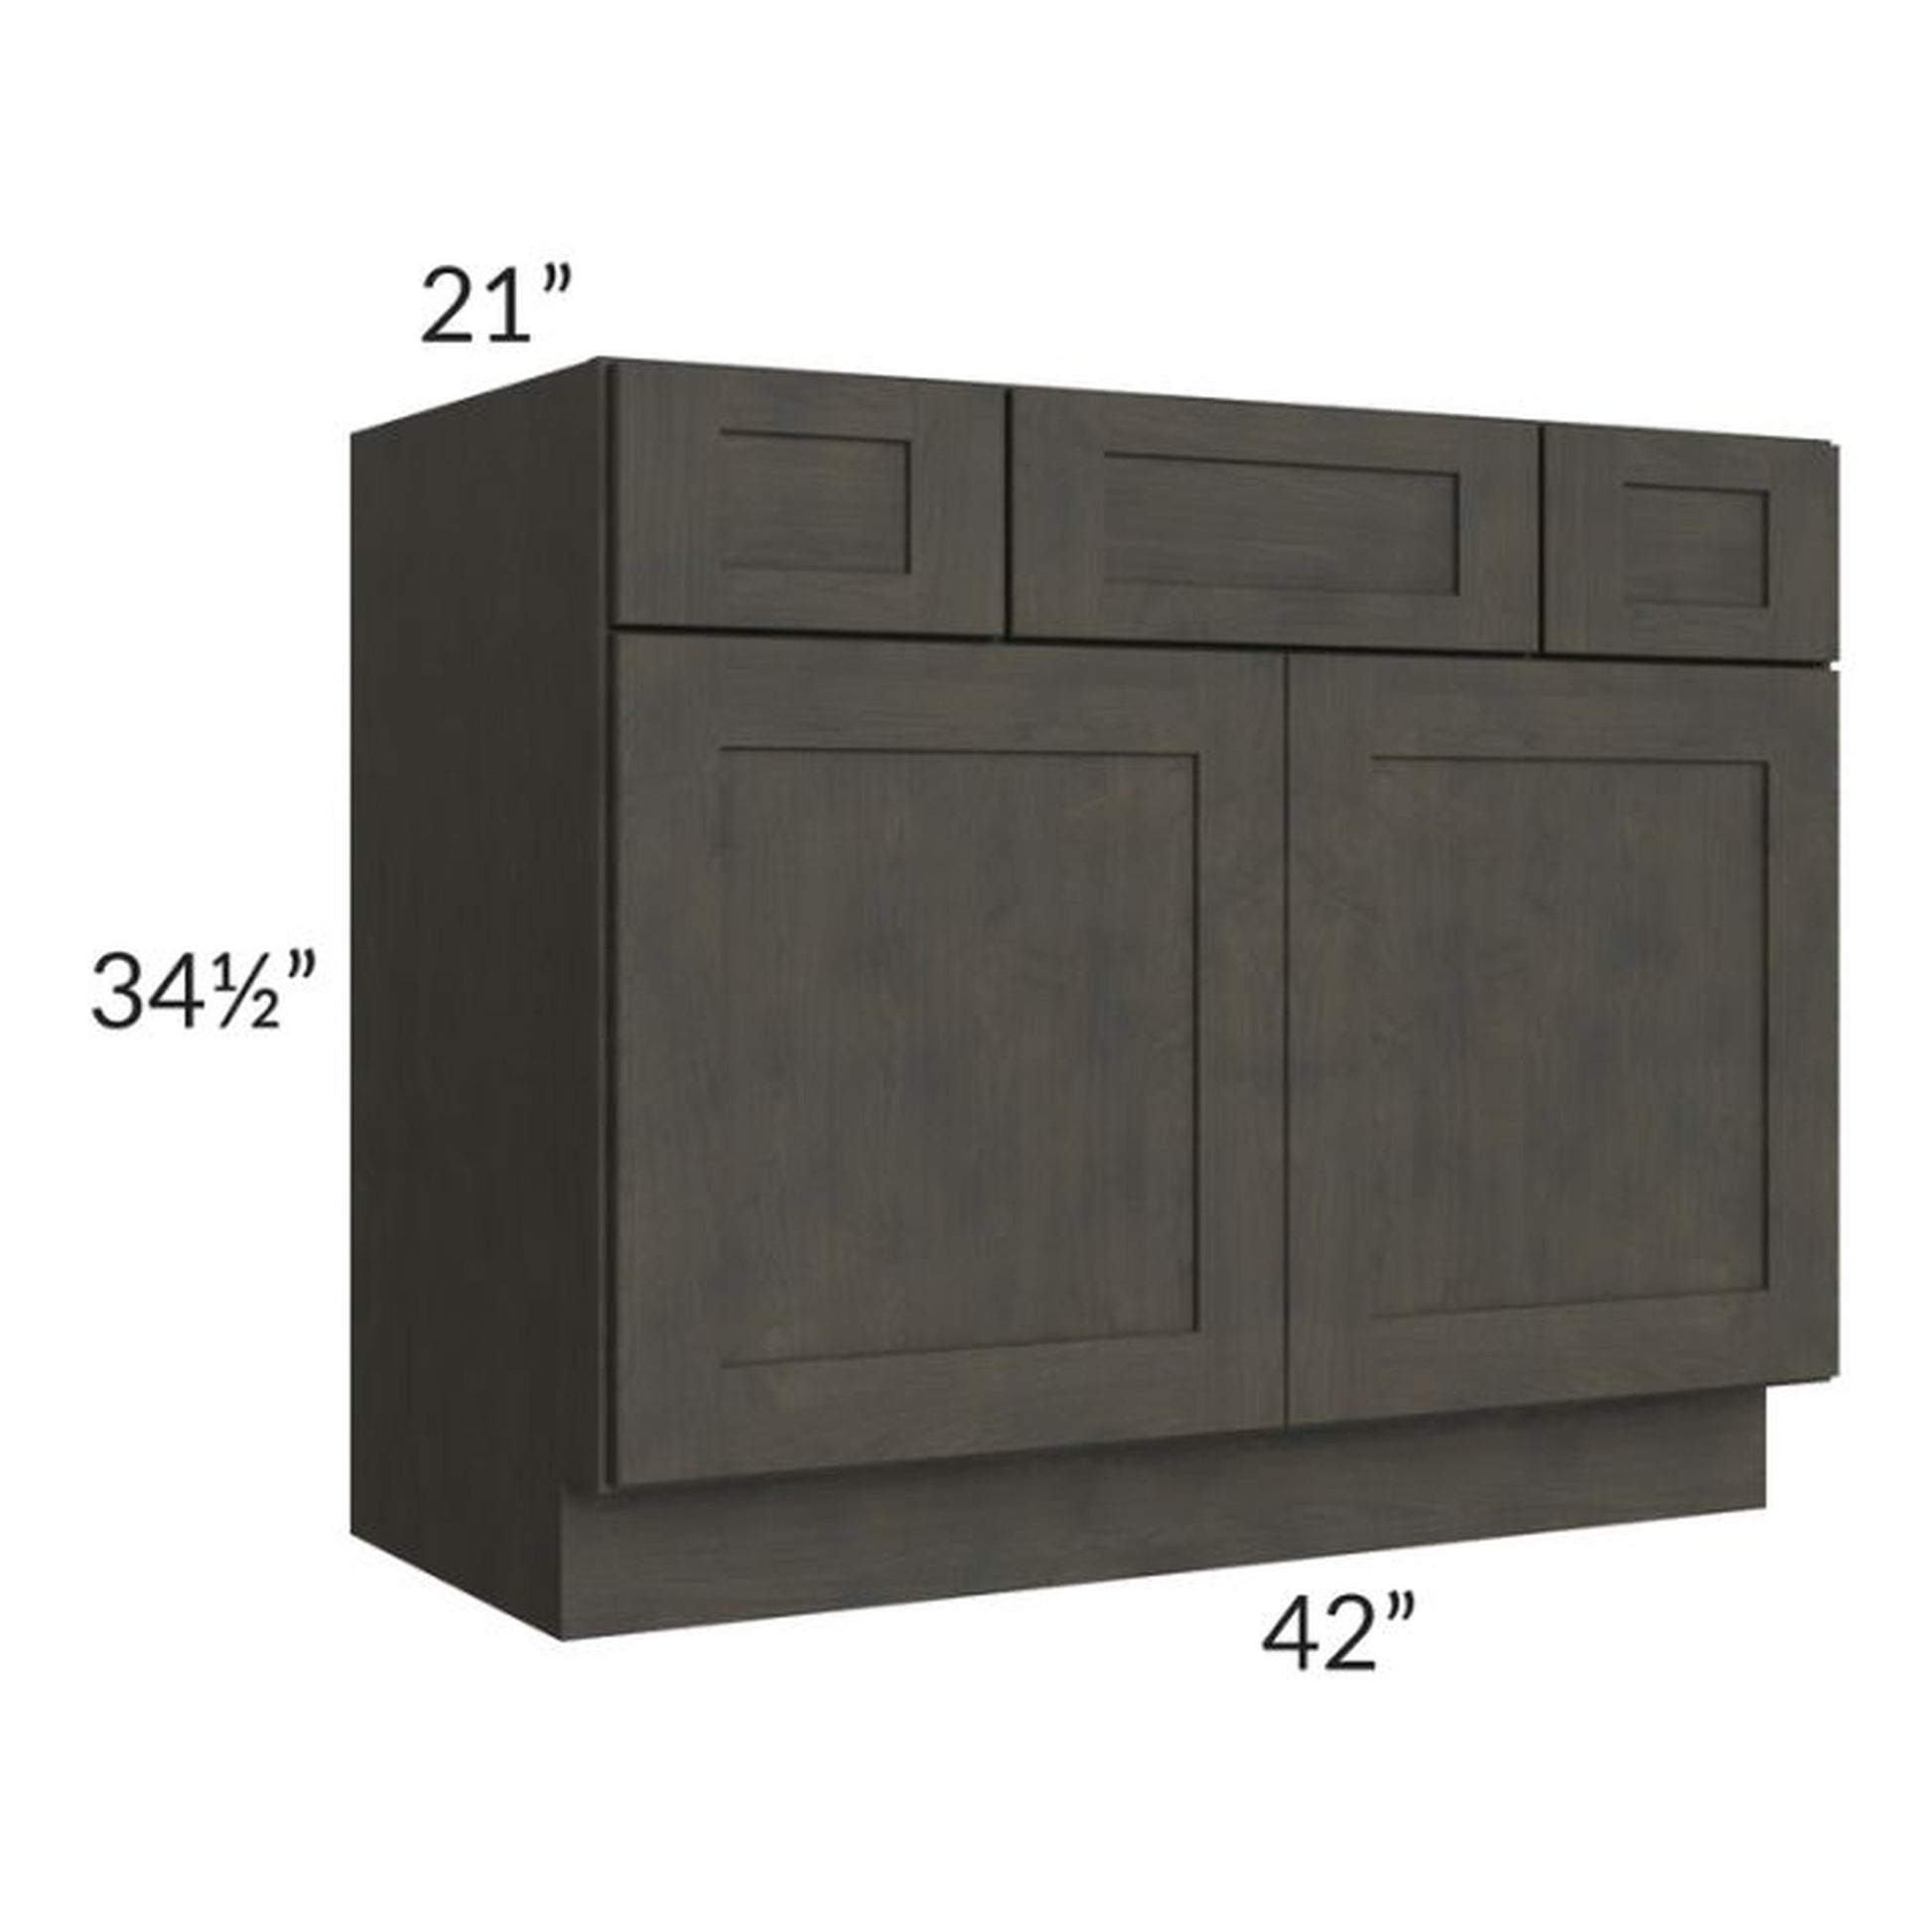 RTA Charcoal Grey Shaker 42" Vanity Base Cabinet with 2 Decorative End Panels